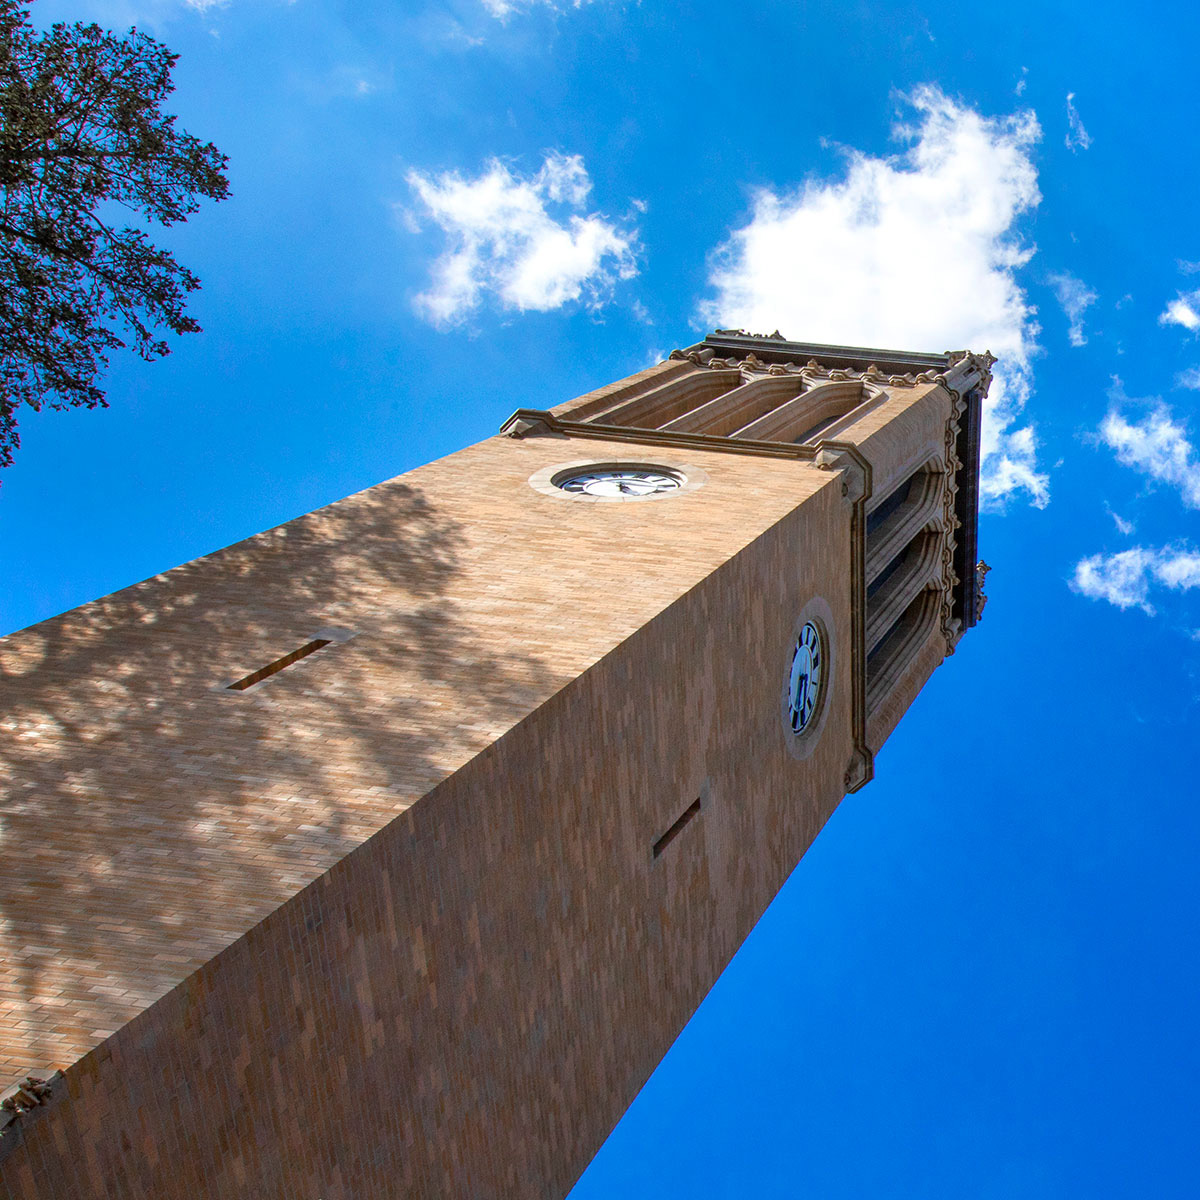 Campanile from below with blue sky background